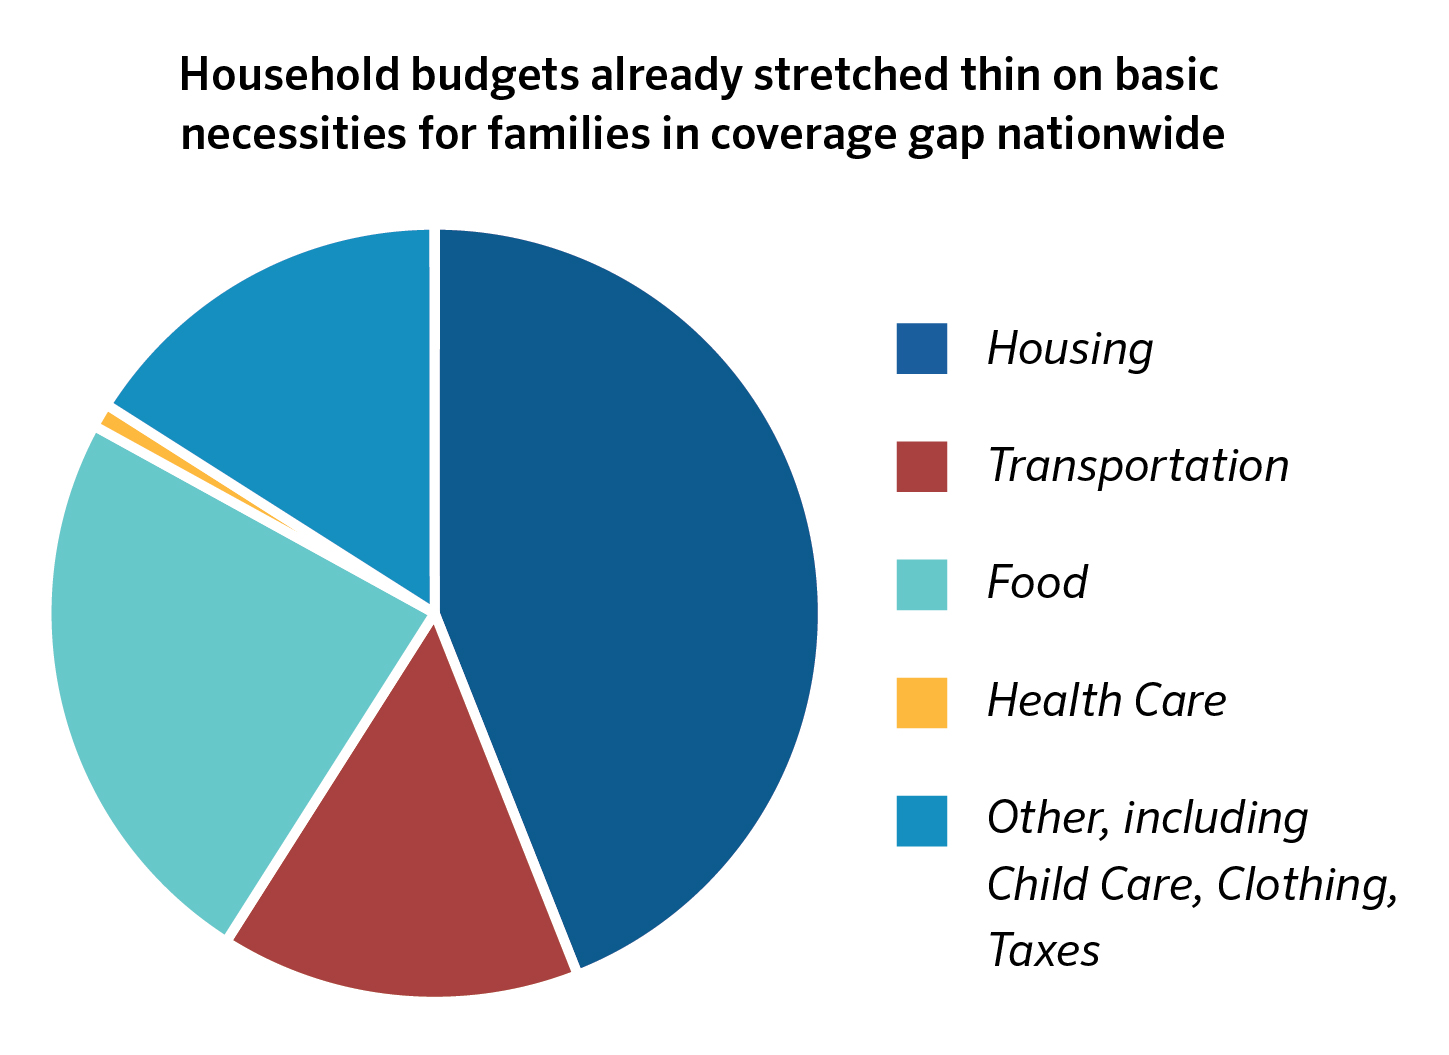 Health Care Spending Among Low-Income Households with and without